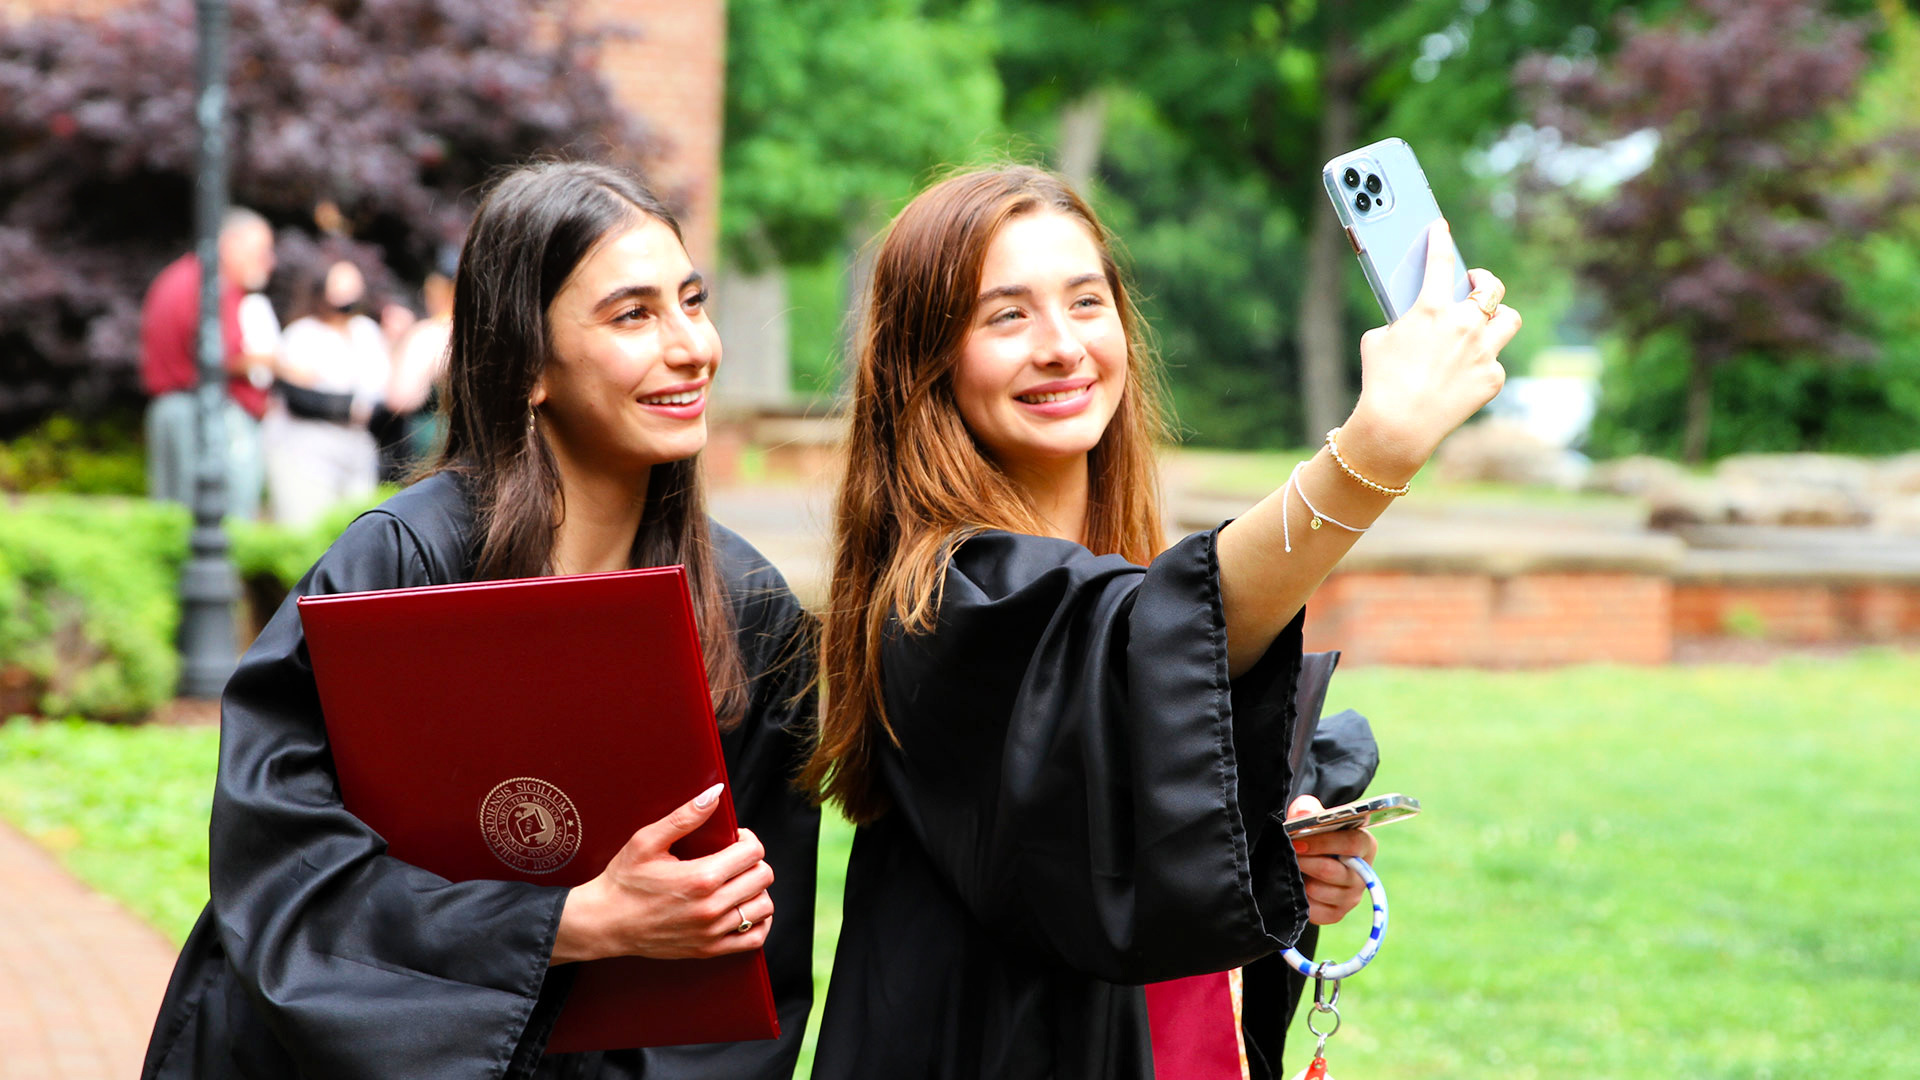 A student holds up a phone to take a photo with another graduate outdoors after Commencement.